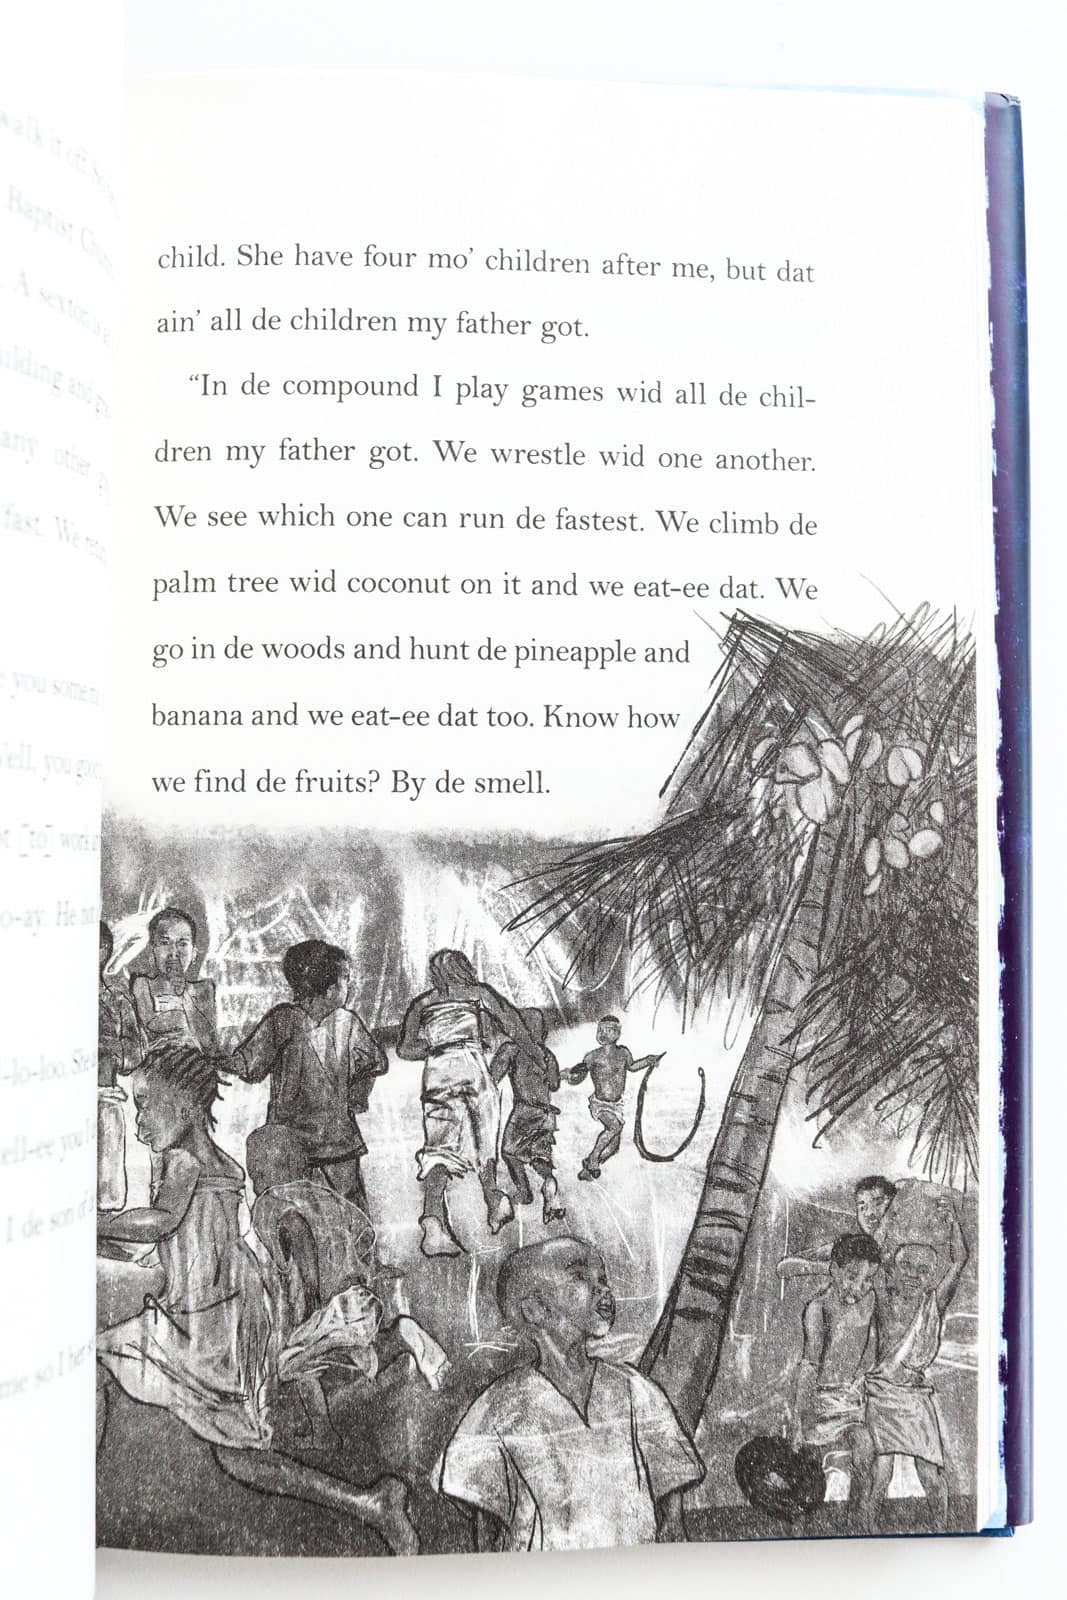 Sample page from Barracoon: Adapted for Young Readers